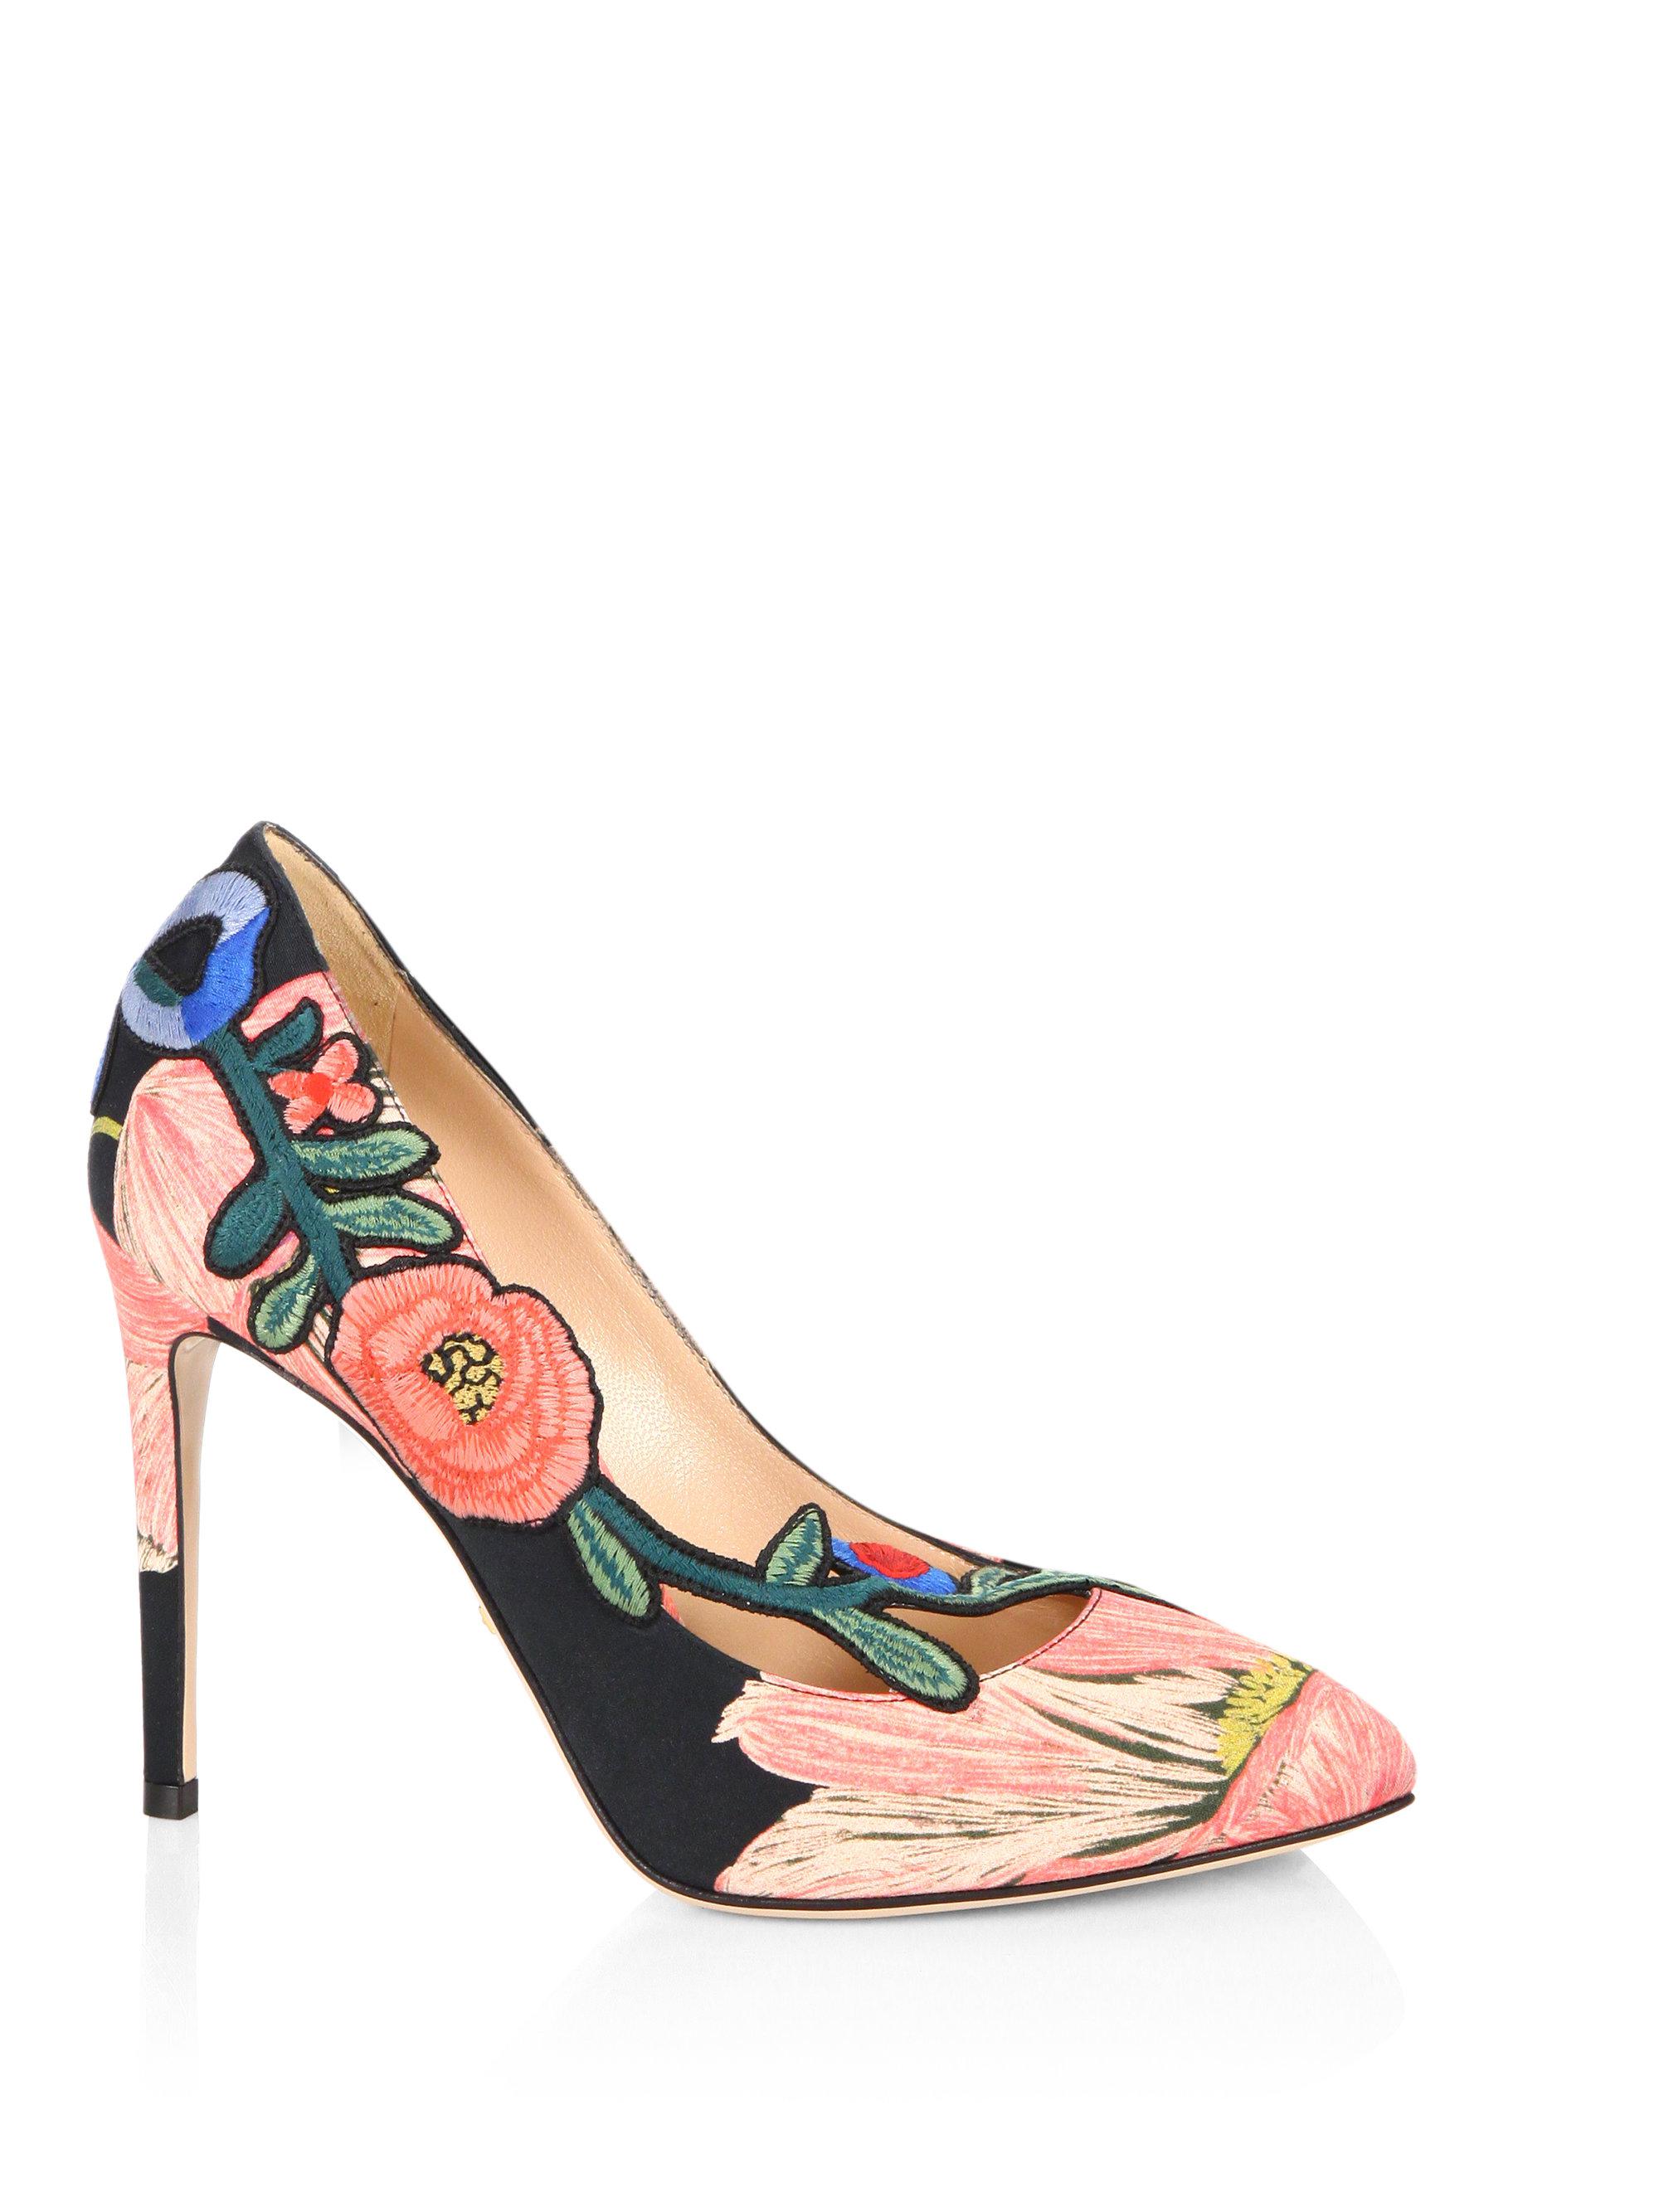 Gucci Ophelia Floral-embroidered Printed Satin Pumps in Pink | Lyst